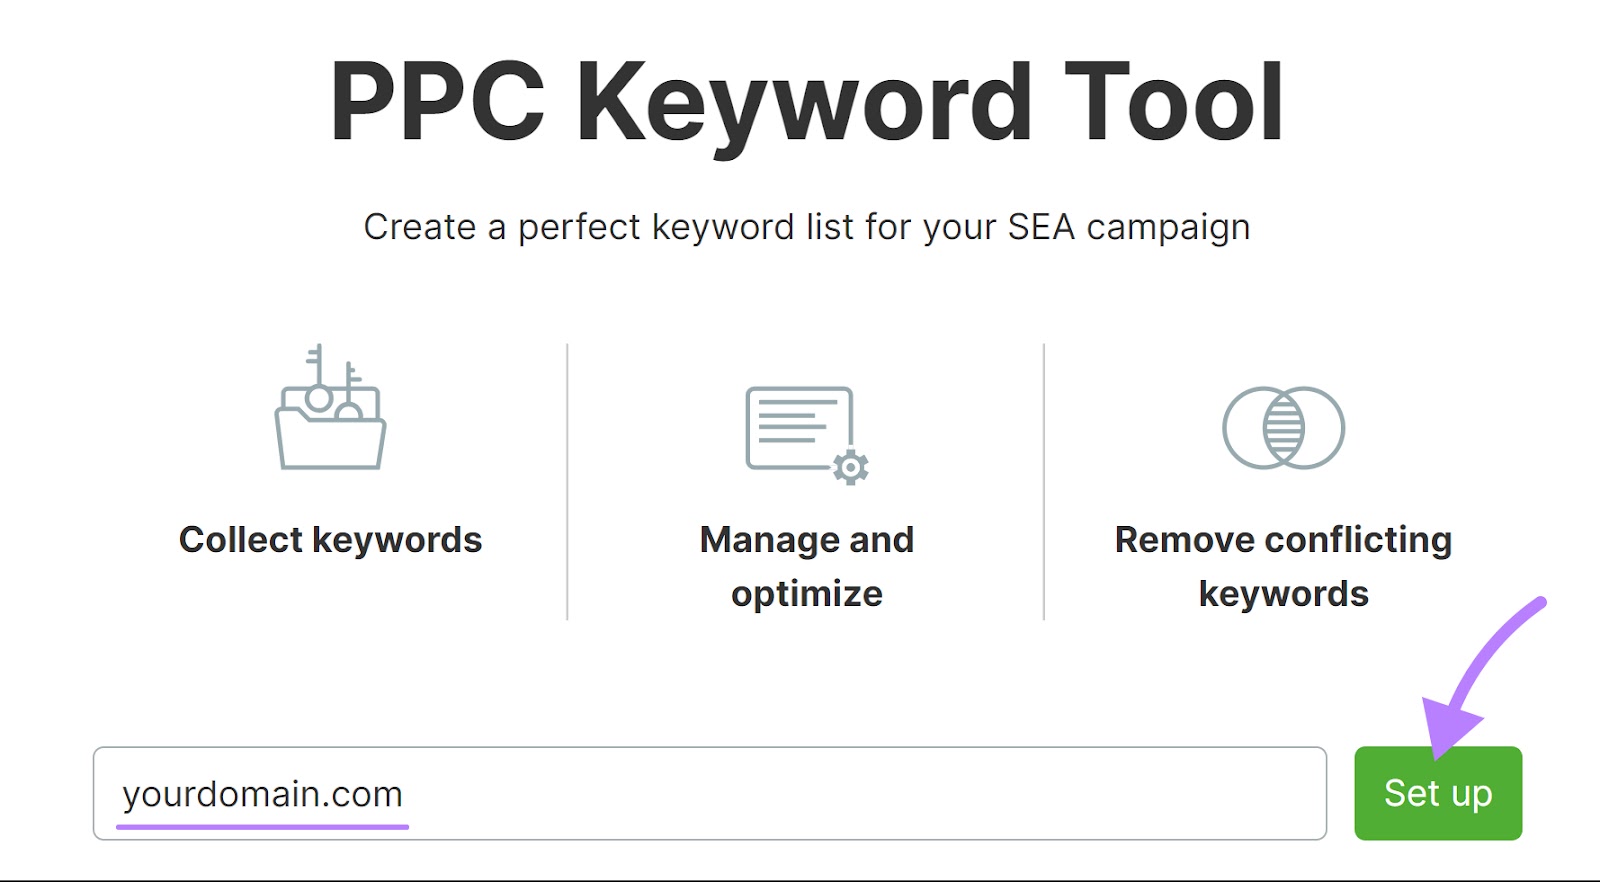 Set up a project in PPC Keyword Tool